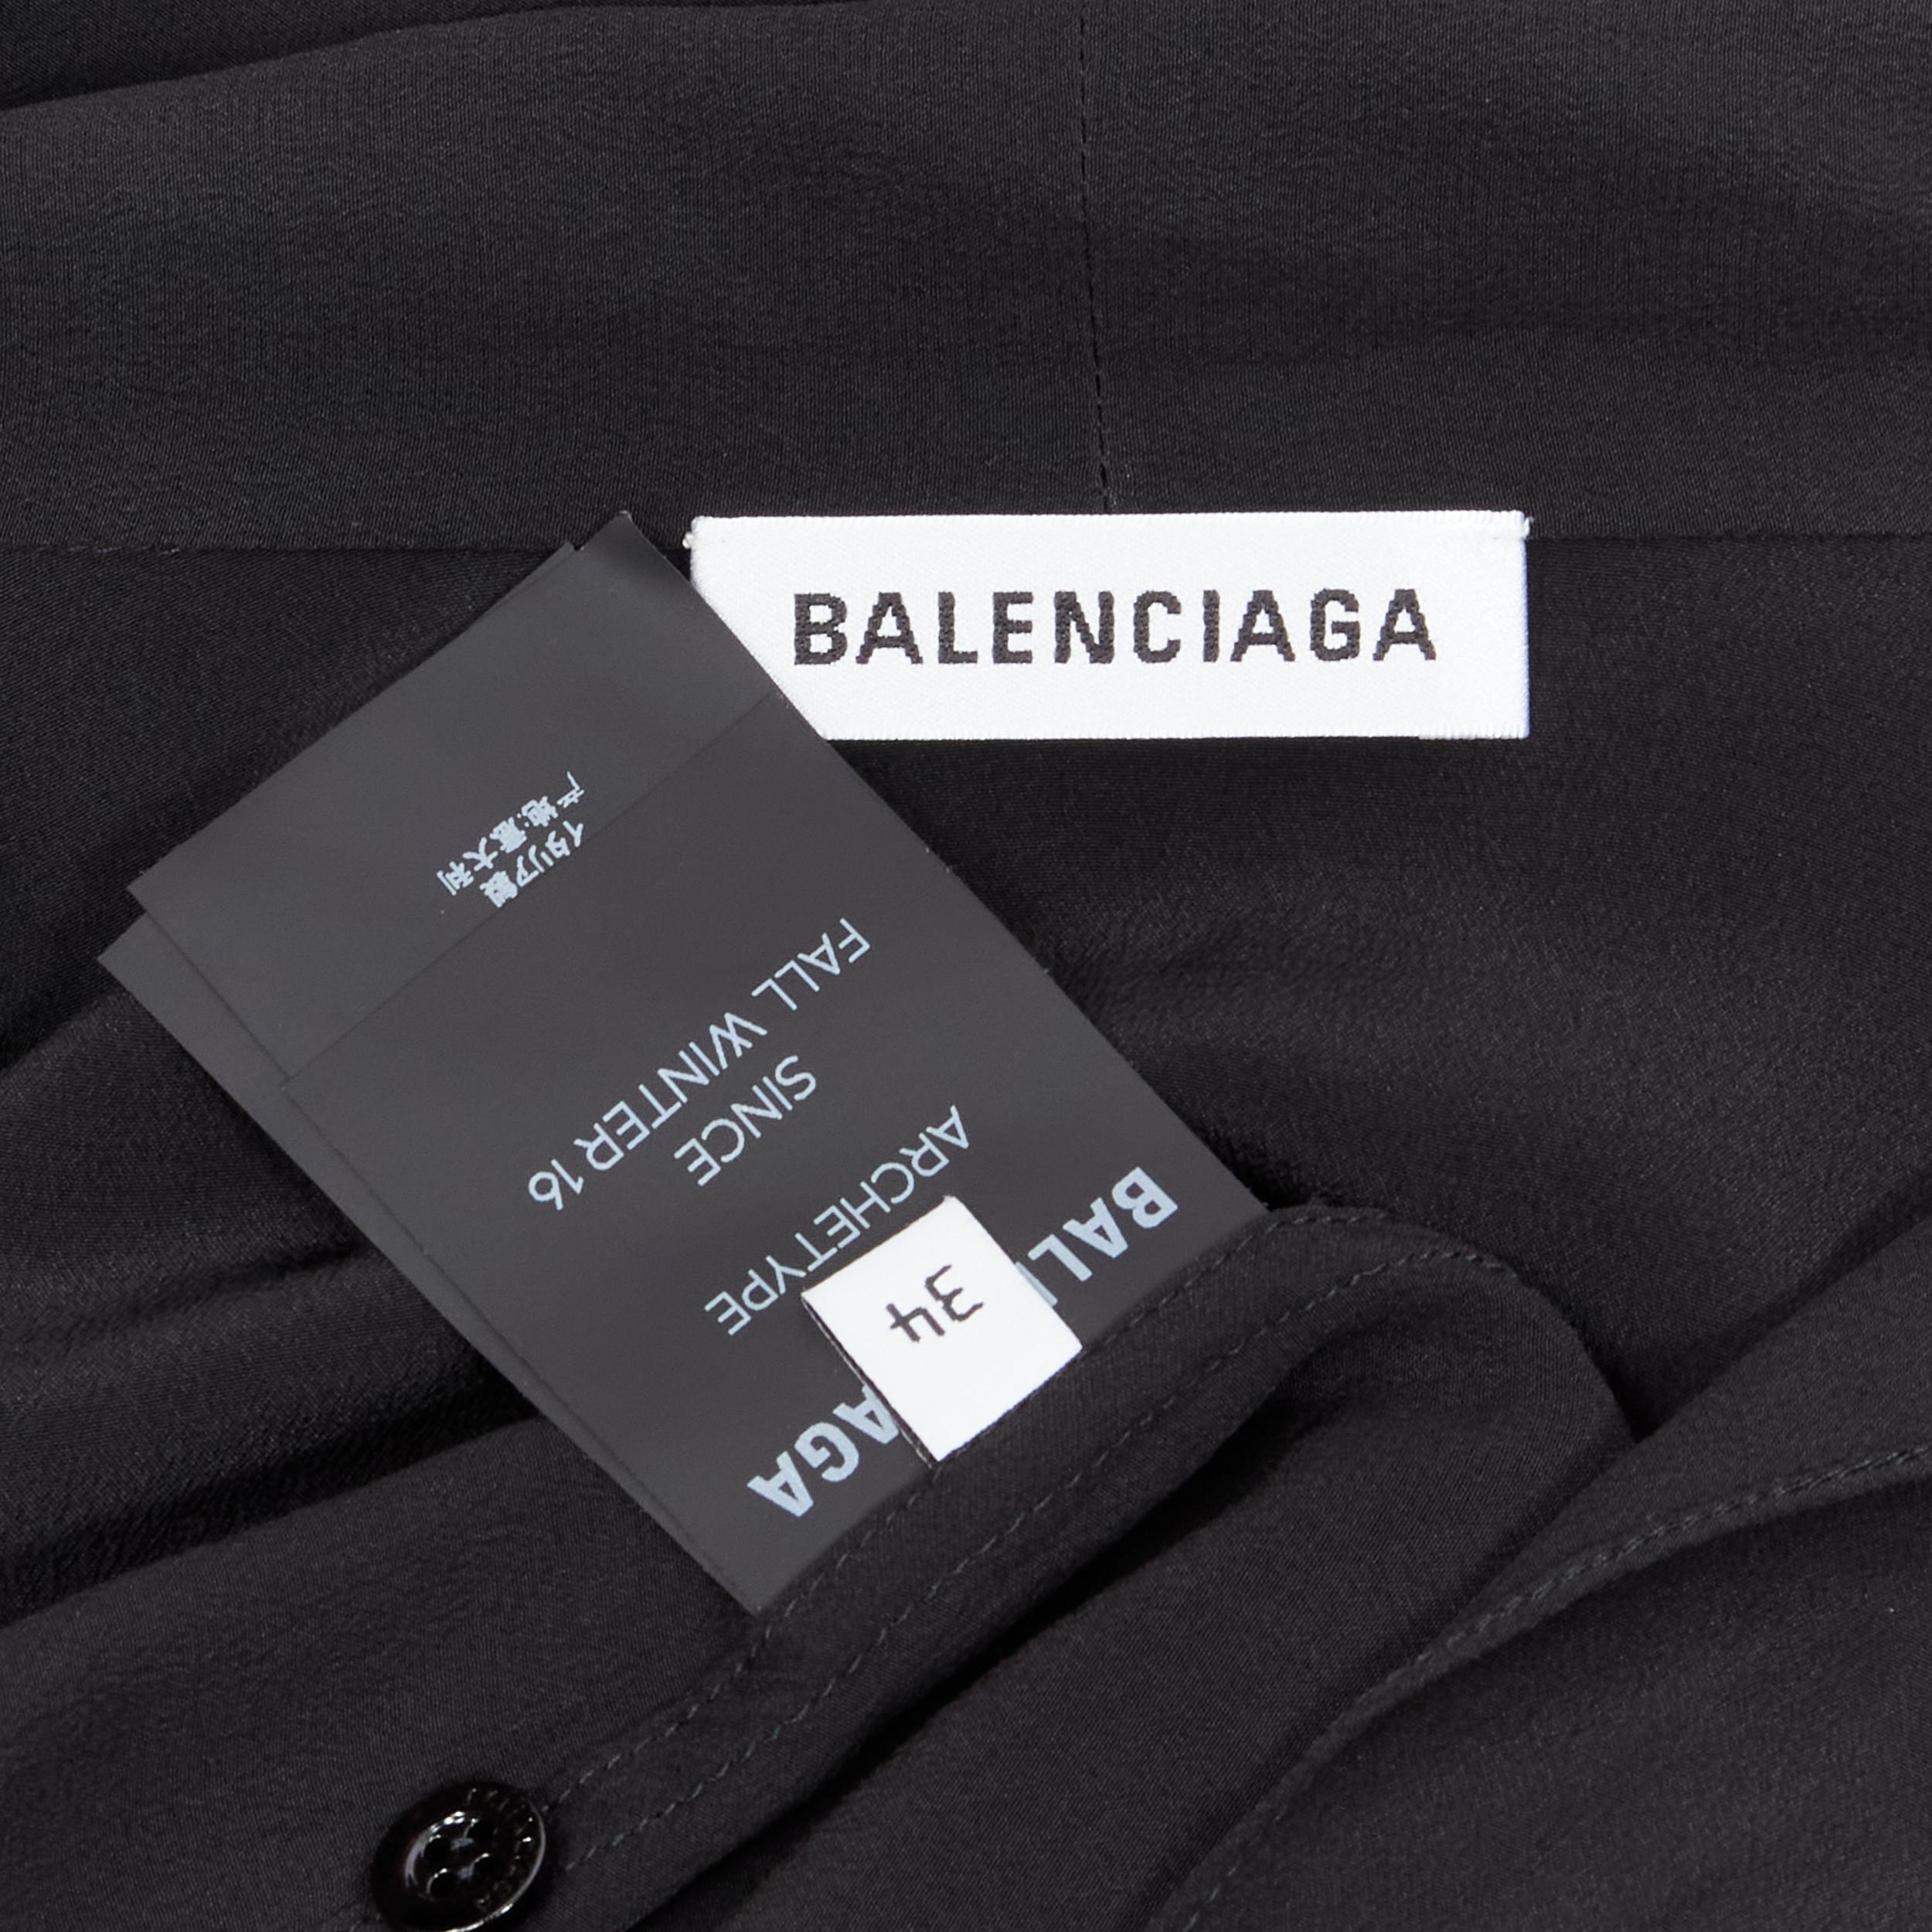 BALENCIAGA 2016 Archetype dipped back pussy bow silk blouse top FR34 XS 2